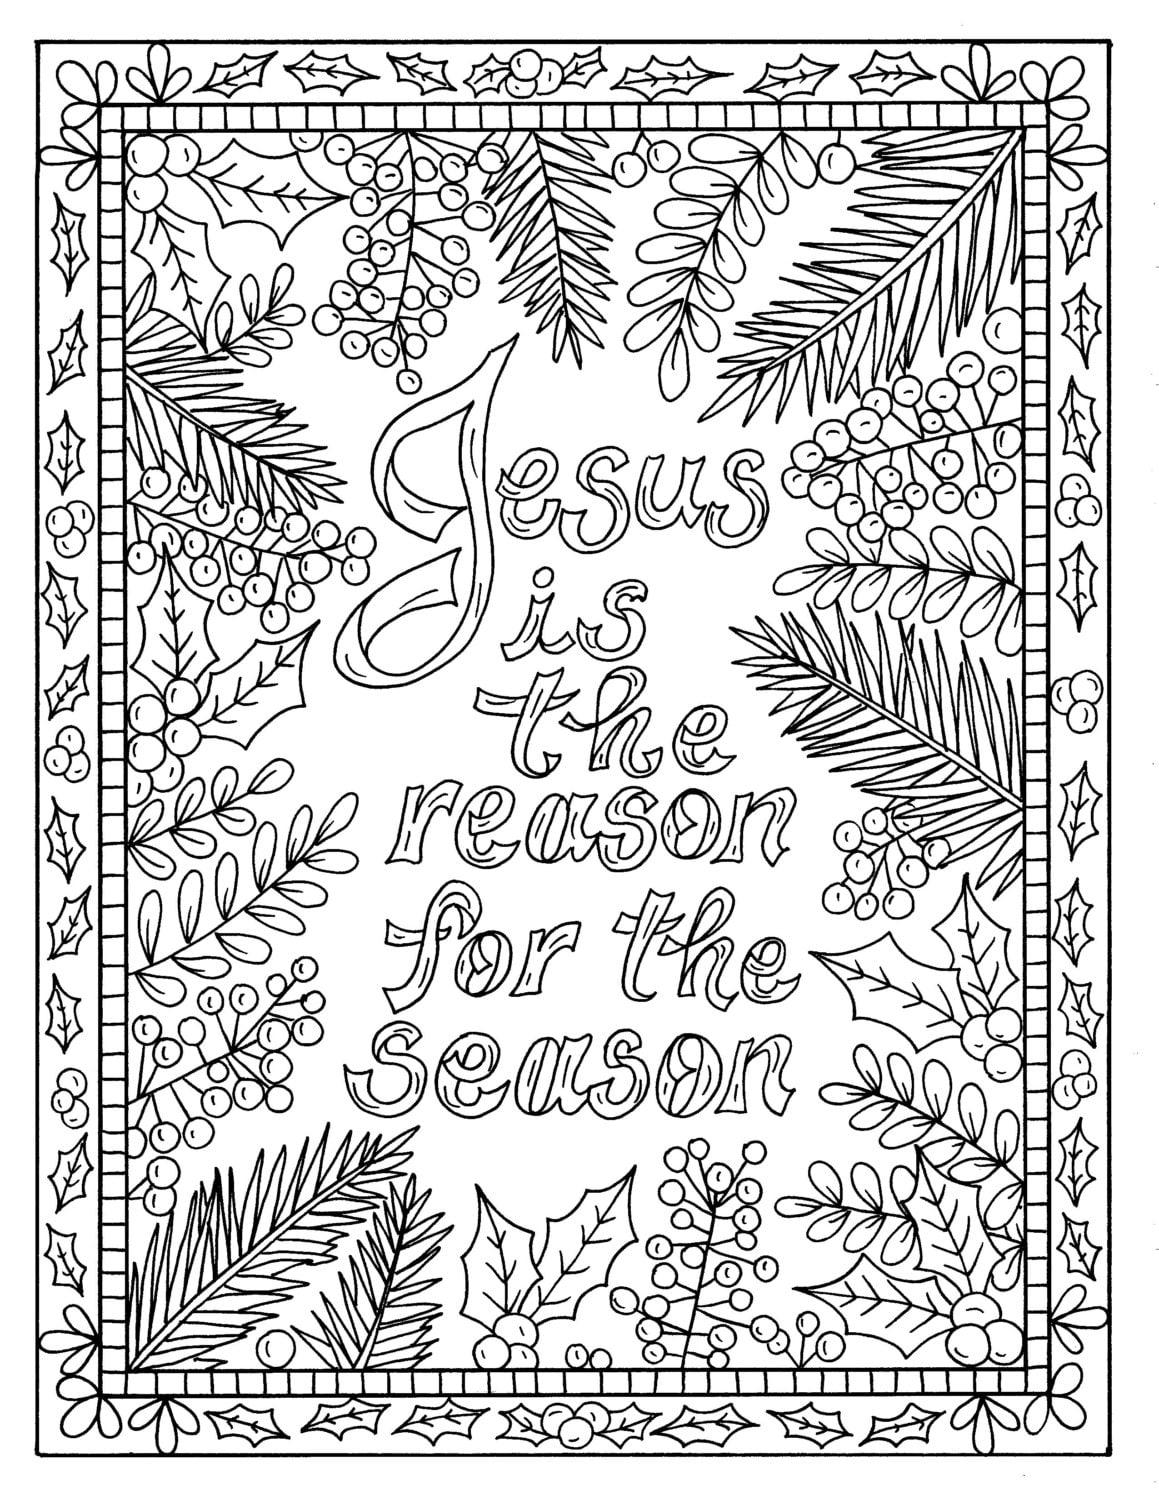 5 Christian Coloring Pages for Christmas Color Book Digital